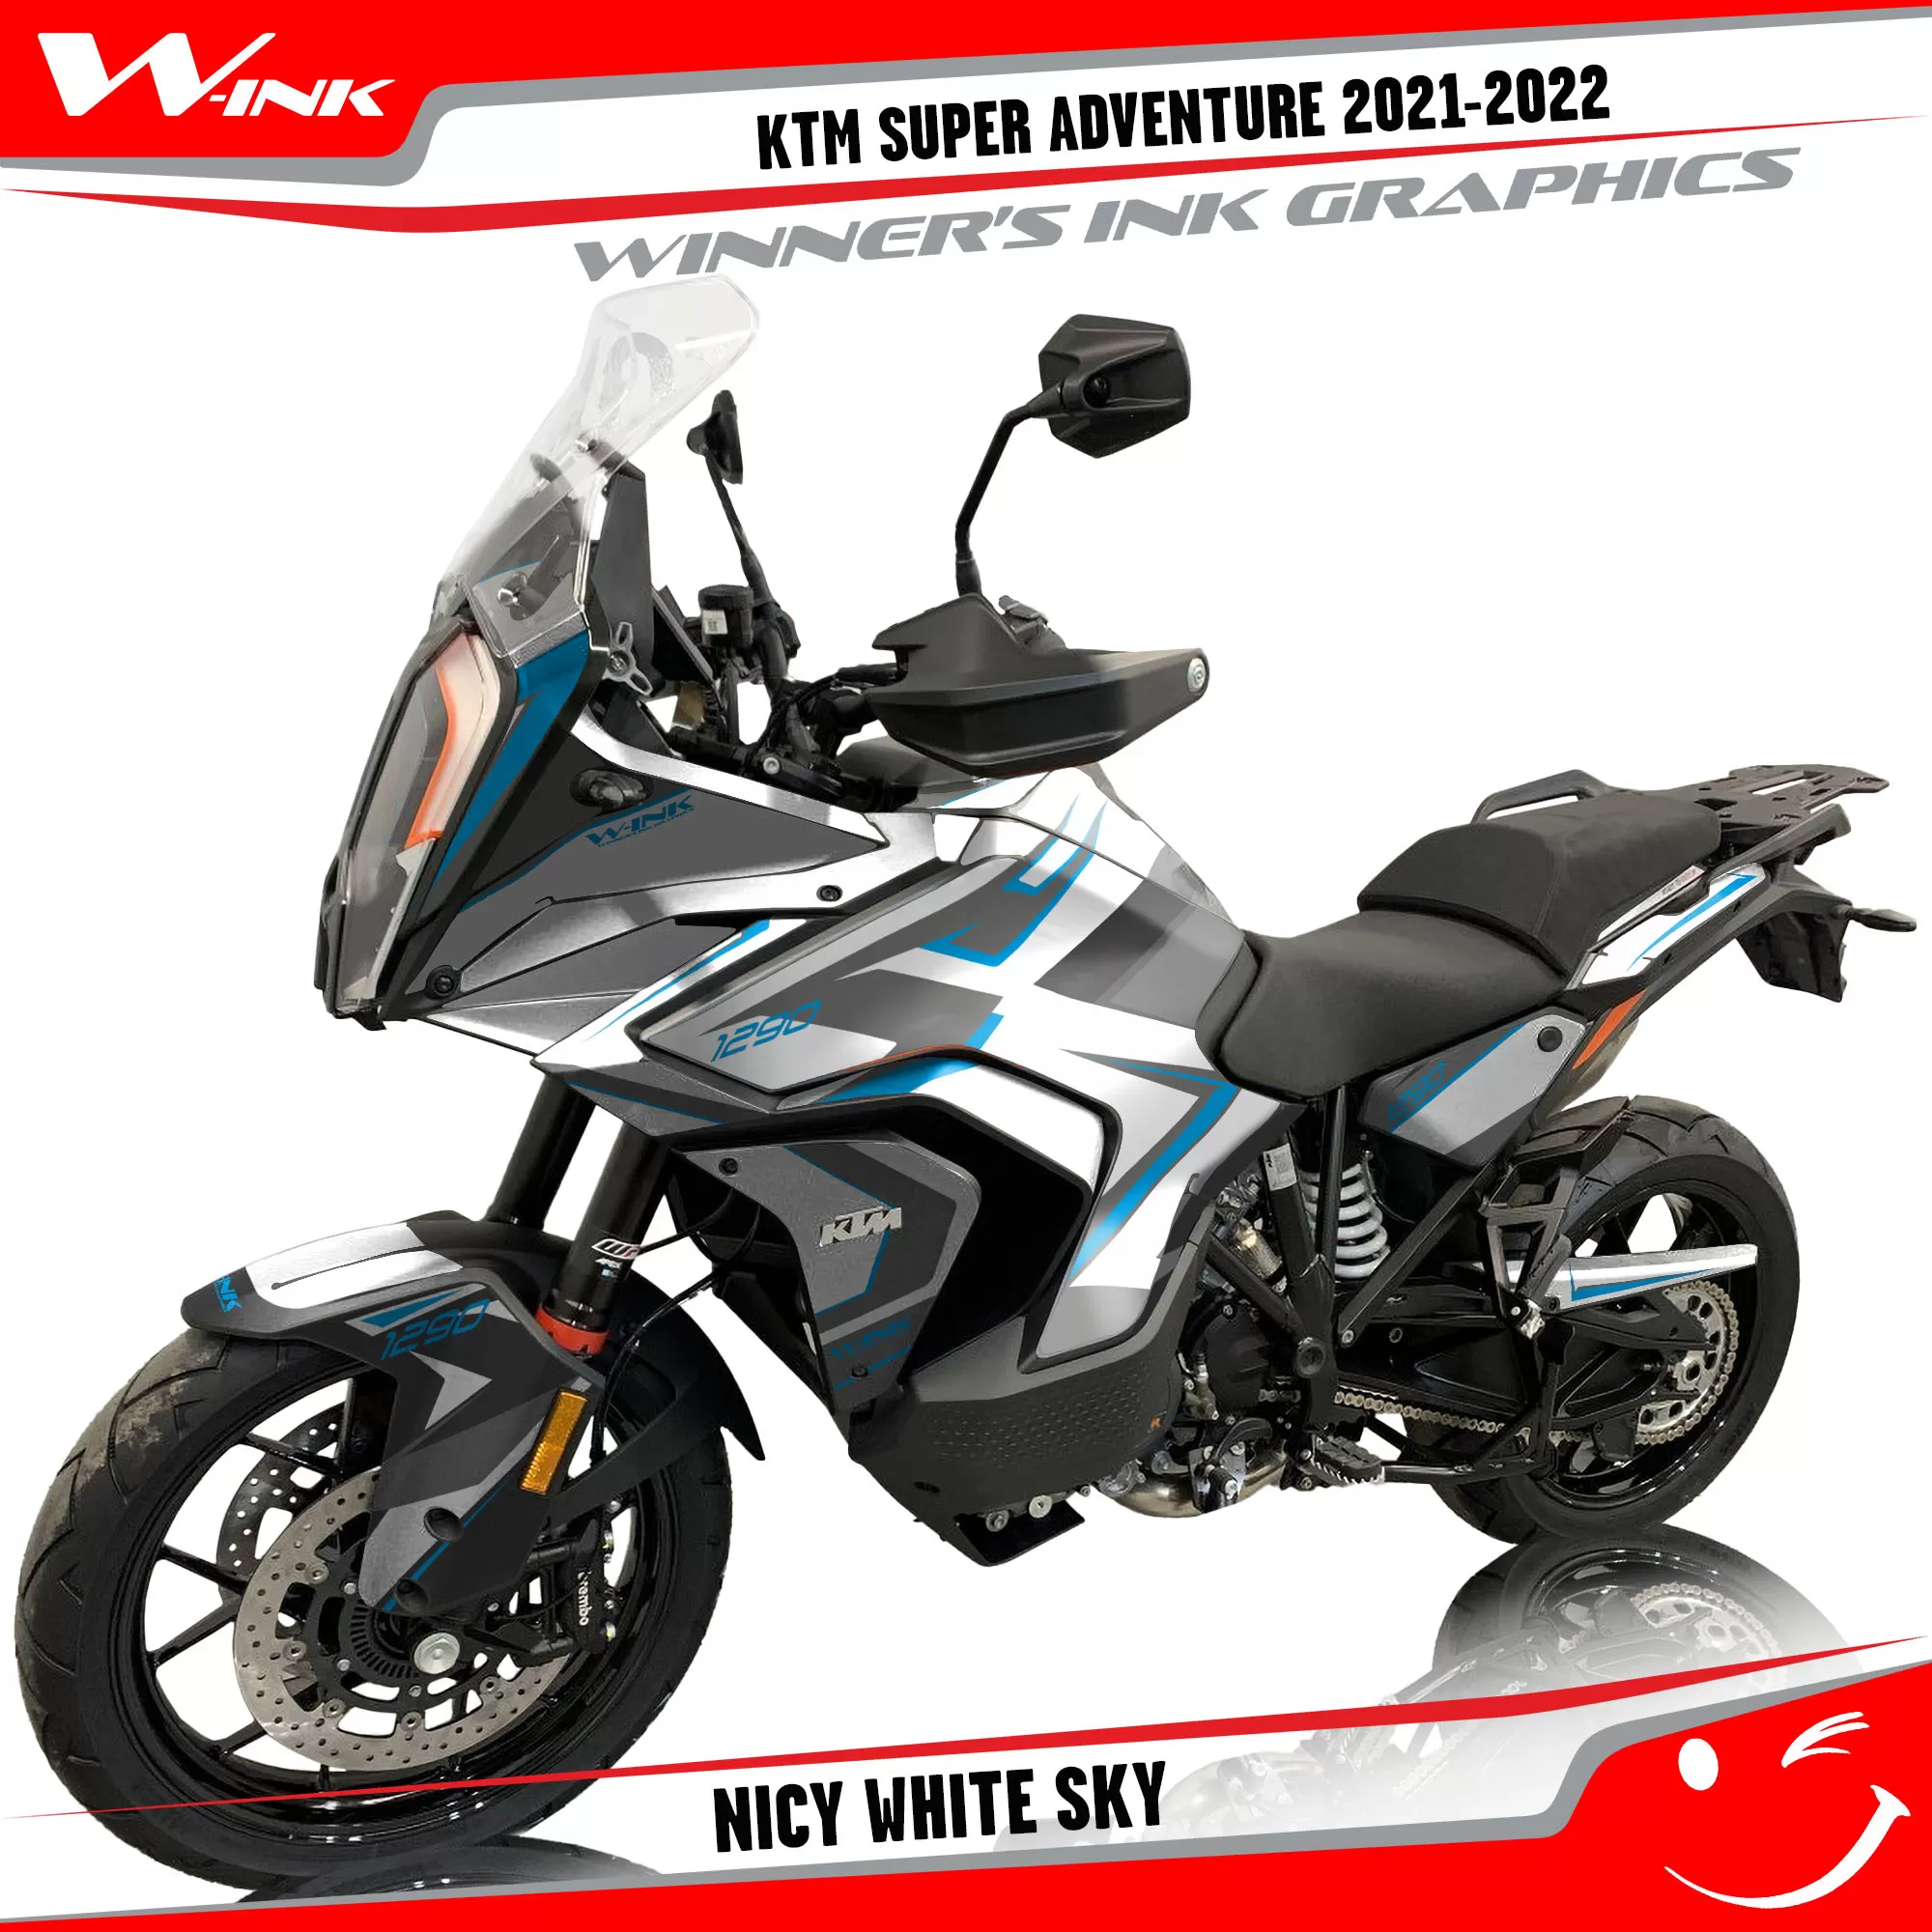 KTM-Super-Adventure-S-2021-2022-graphics-kit-and-decals-with-designs-Nicy-White-Sky